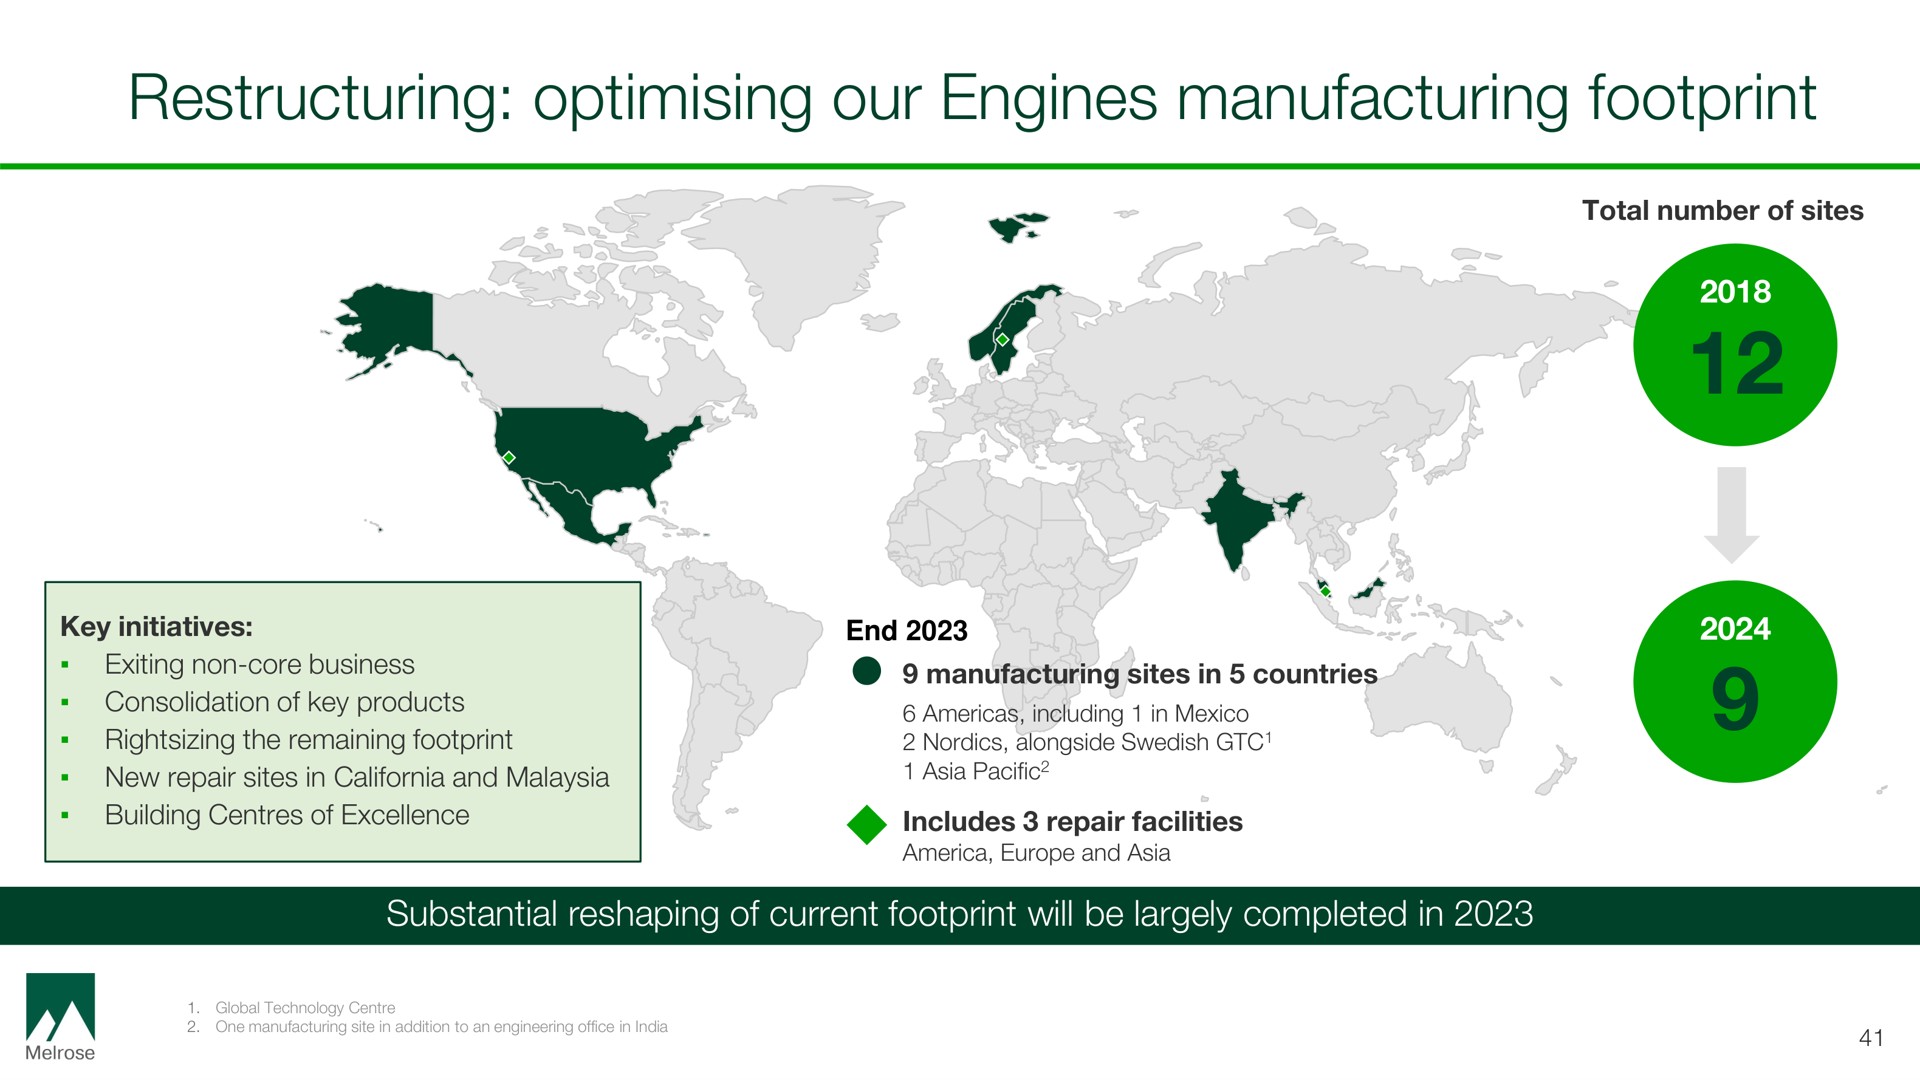 our engines manufacturing footprint | Melrose